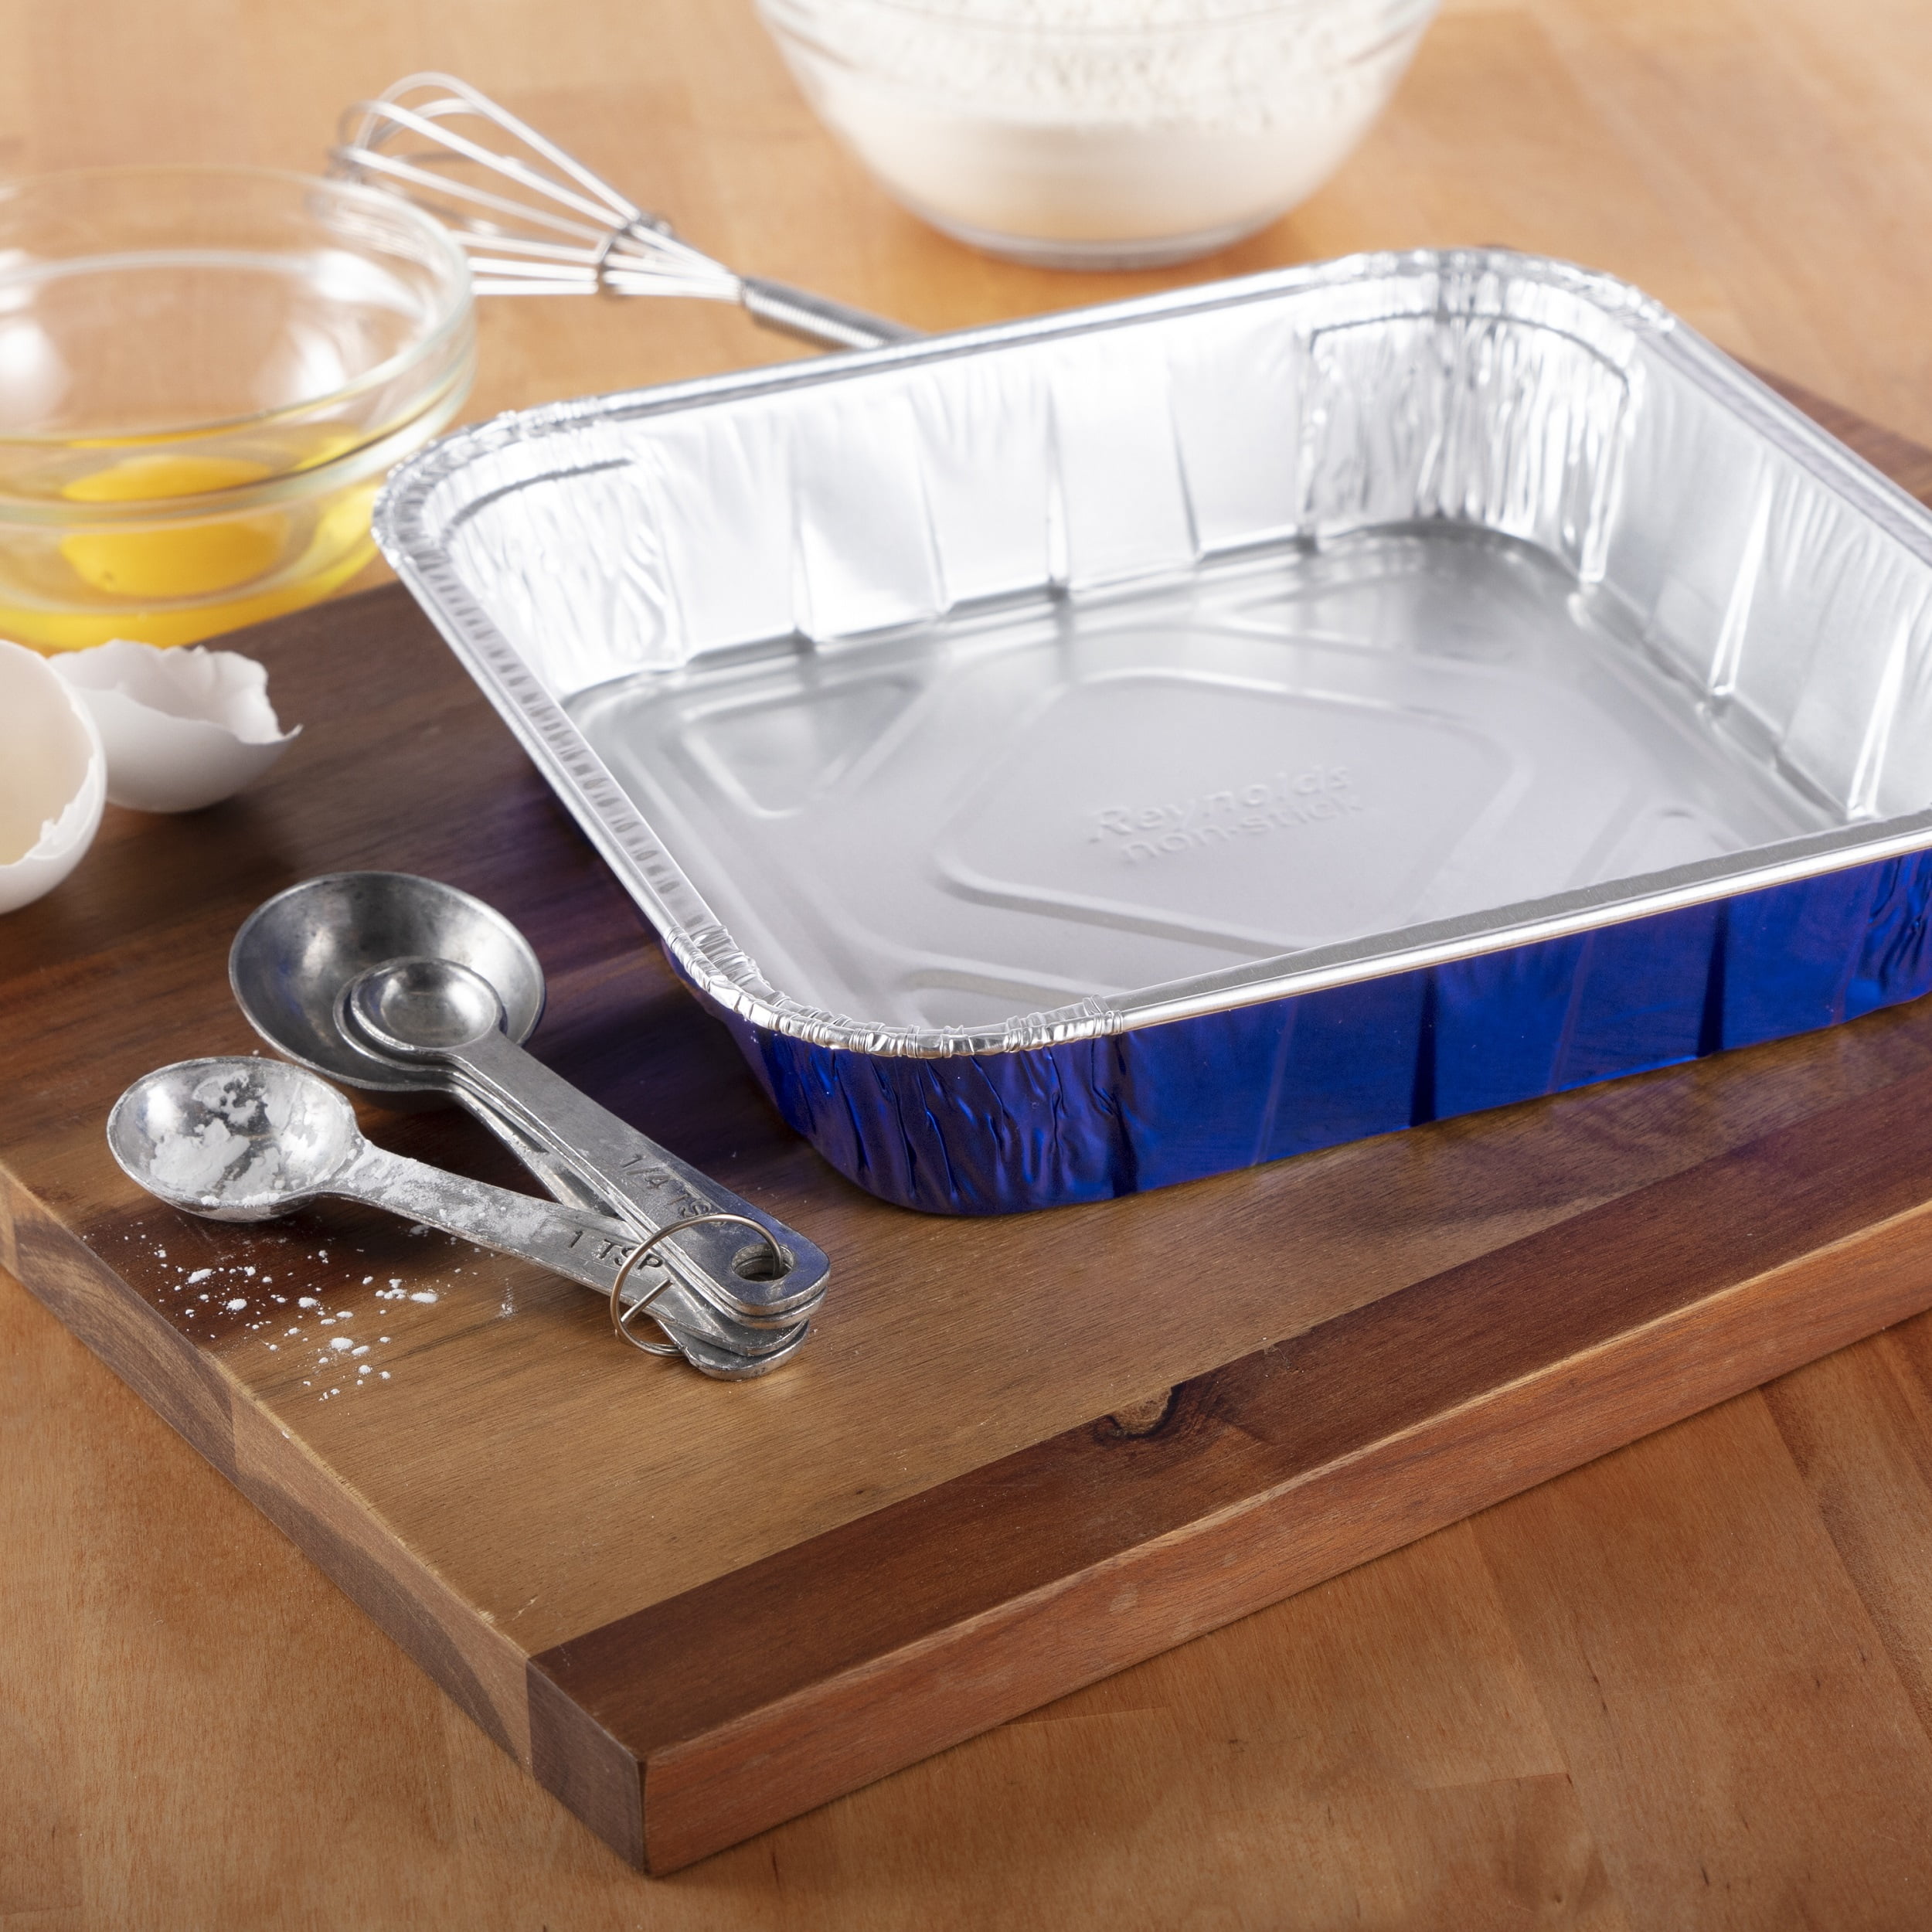 Reynolds Disposable Bakeware Non-stick Pans With Lids - 3ct : Target